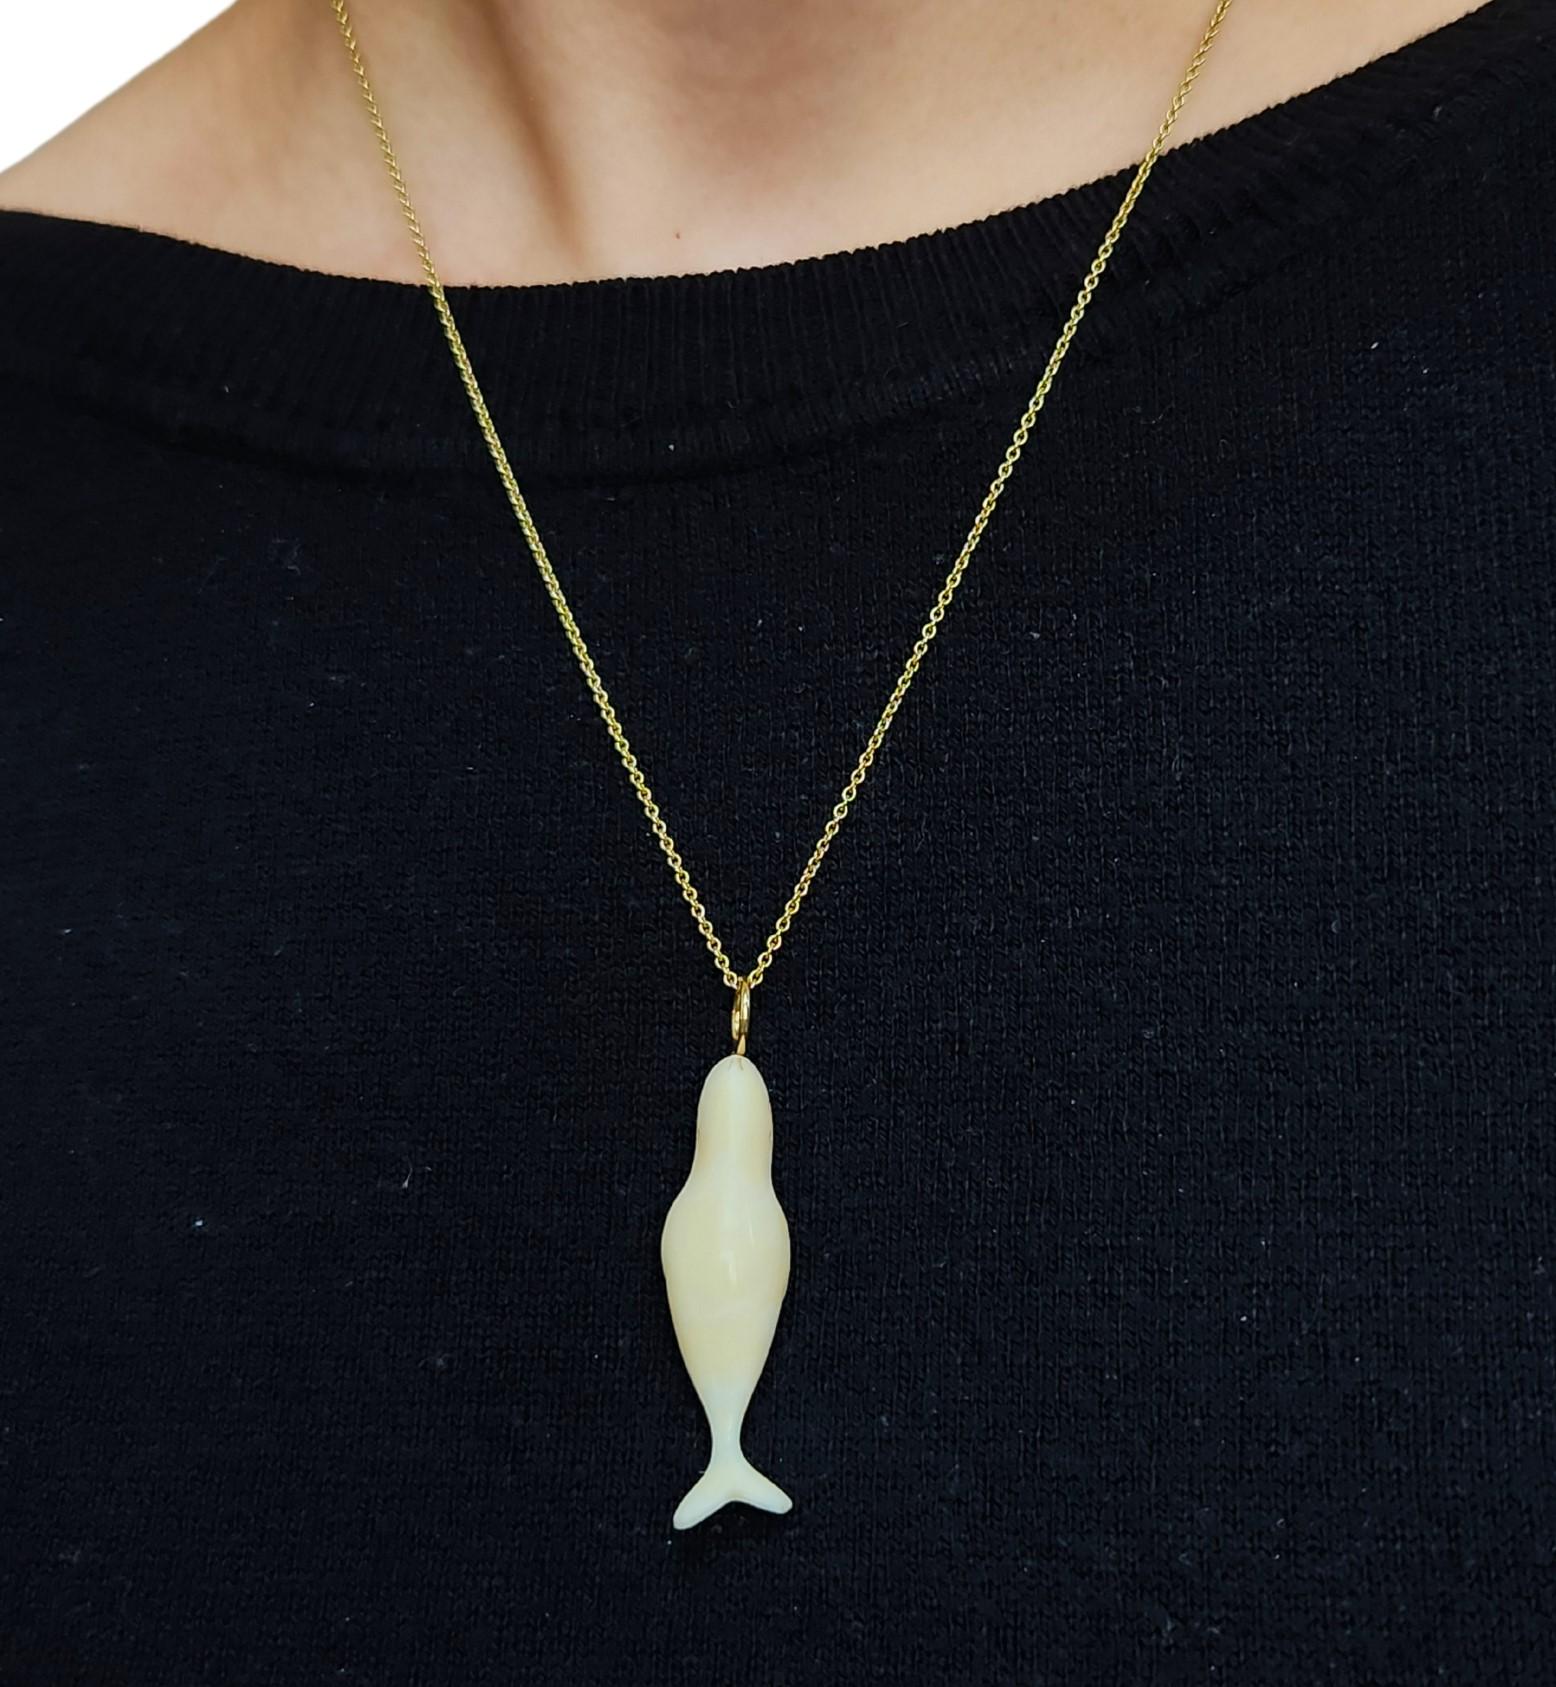 Vintage likely Inuit hand carving of a whale one of a kind necklace in 18K. Natural simply designed pendant necklace that cherishes indigenous people who protect the earth and this small collection is an homage to the North American Inuits that I